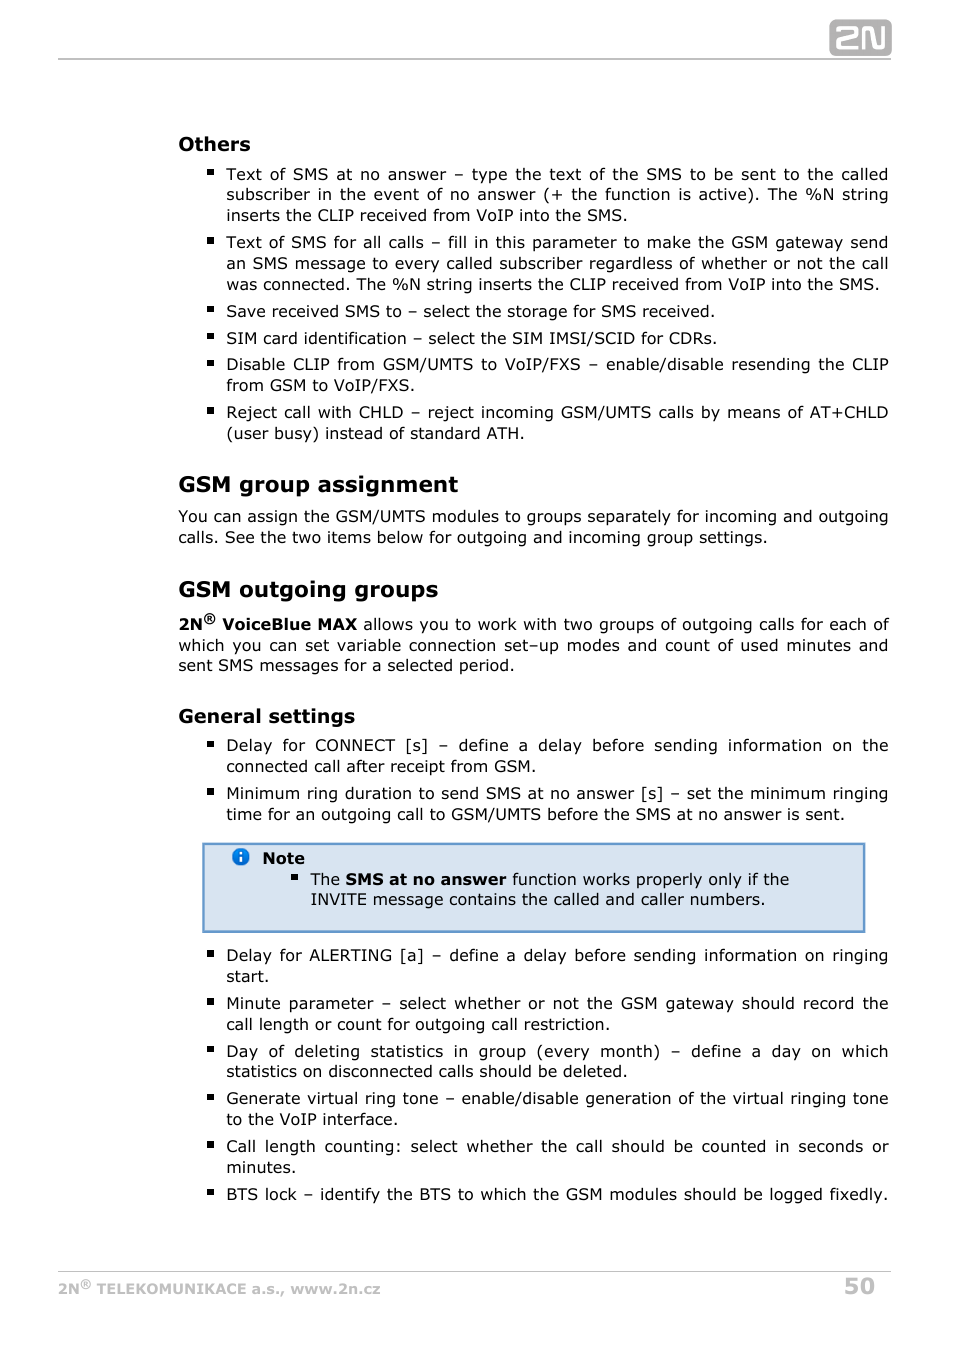 Gsm group assignment, Gsm outgoing groups | 2N VoiceBlue MAX v1.2 User Manual | Page 50 / 111